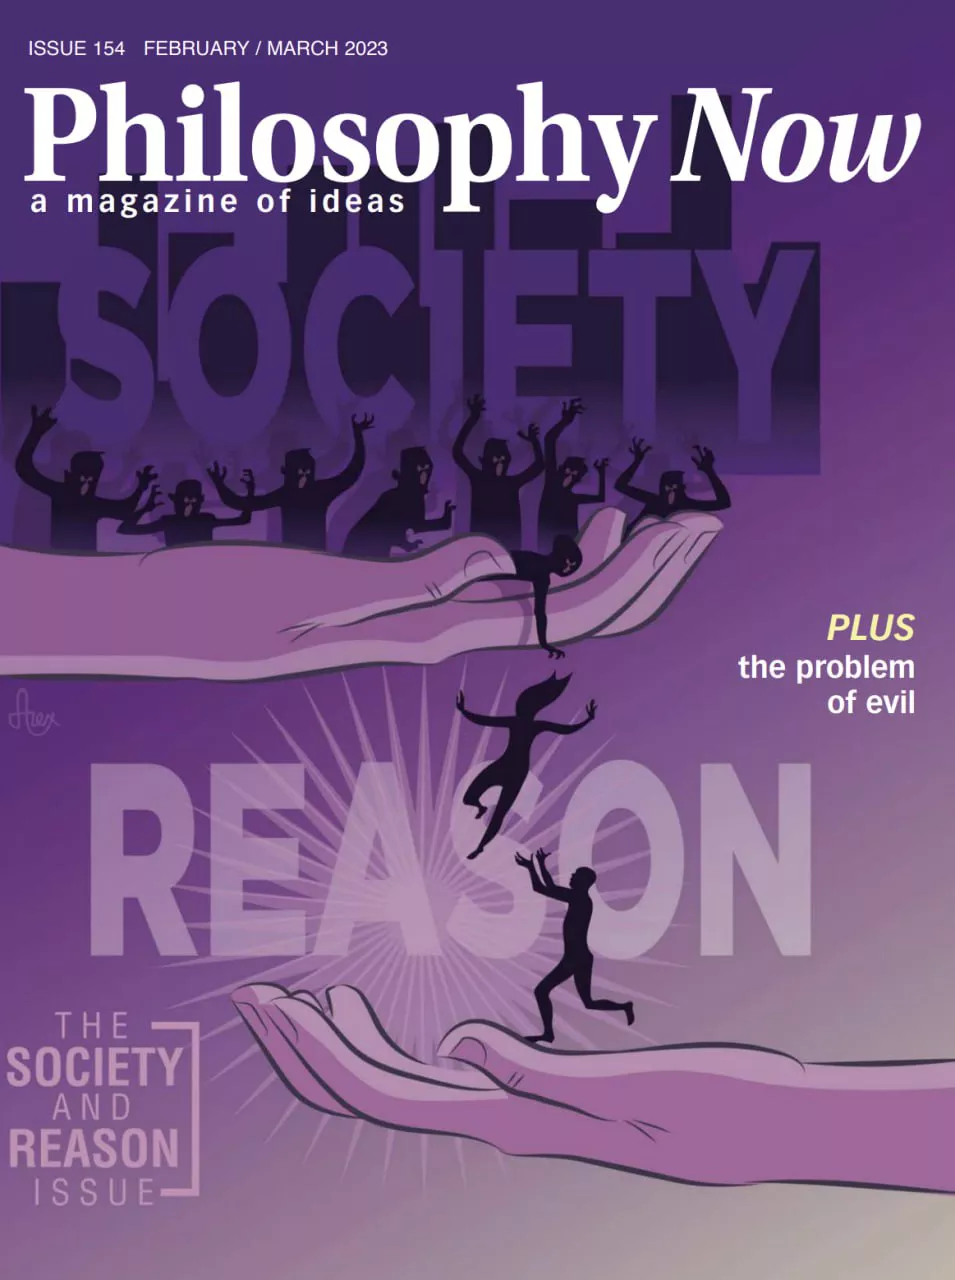 Philosophy Now - February_March 2023 (philosophy)